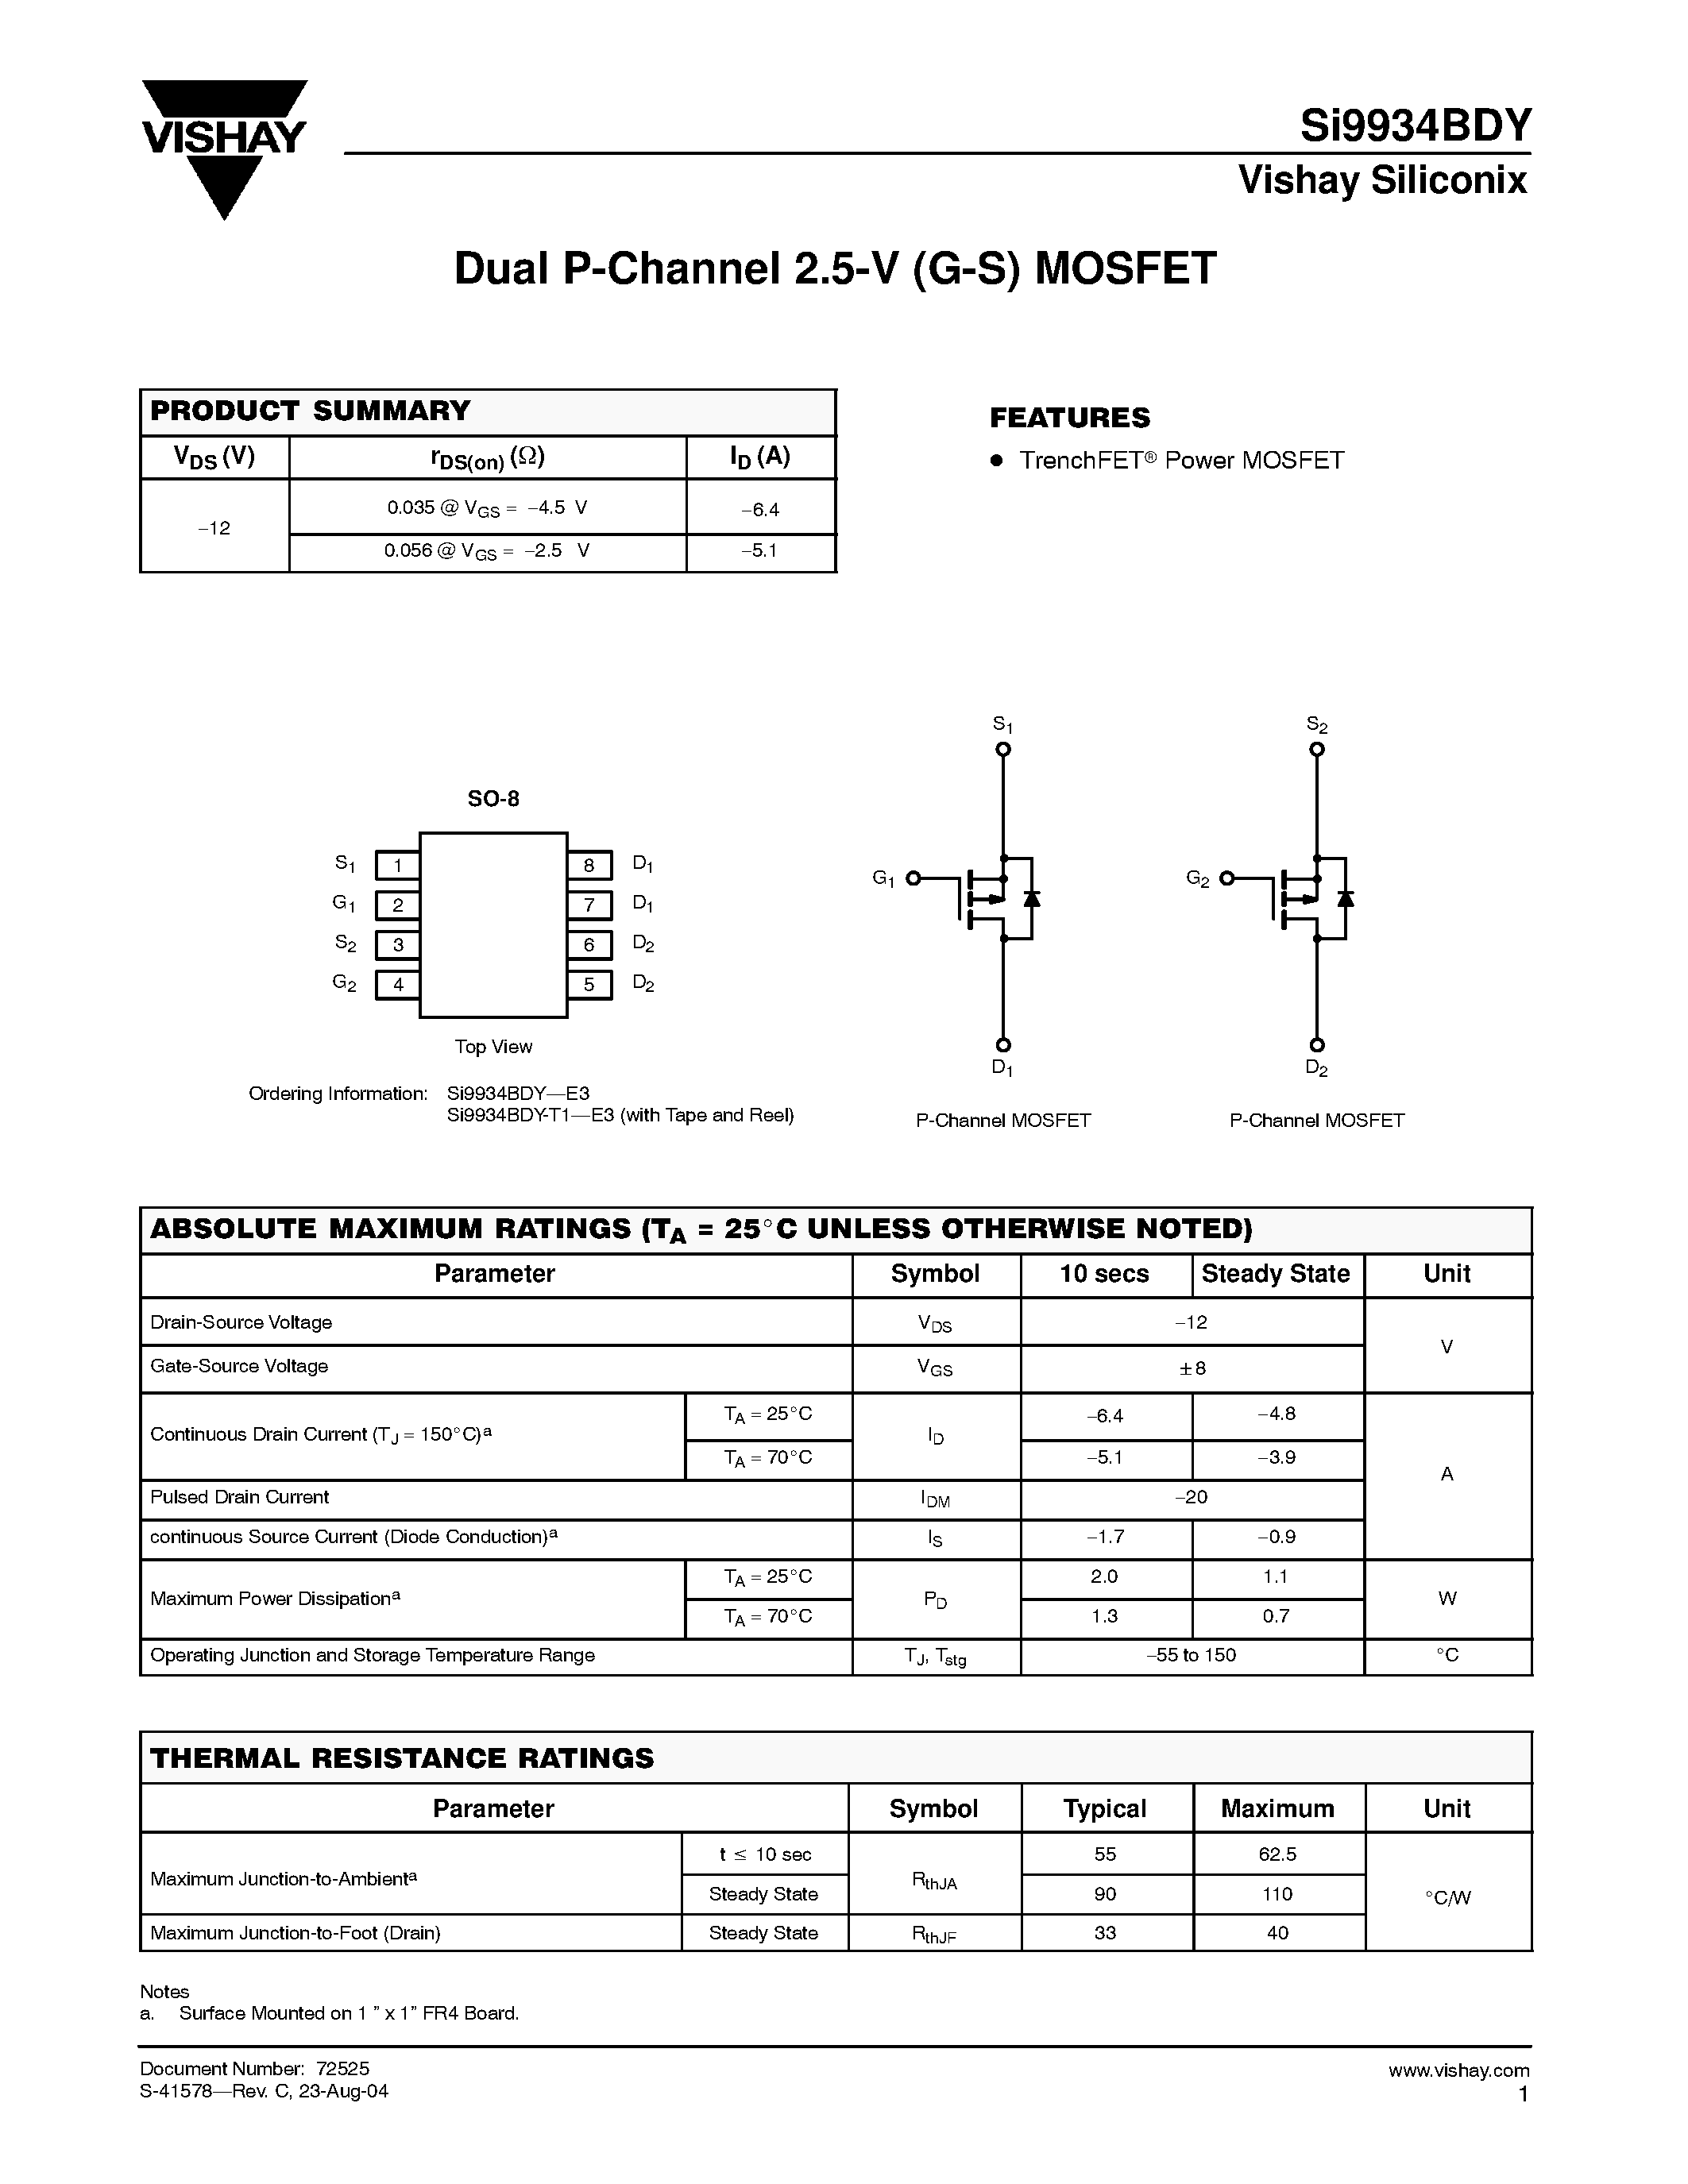 Datasheet SI9934BDY - Dual P-Channel 2.5-V (G-S) MOSFET page 1